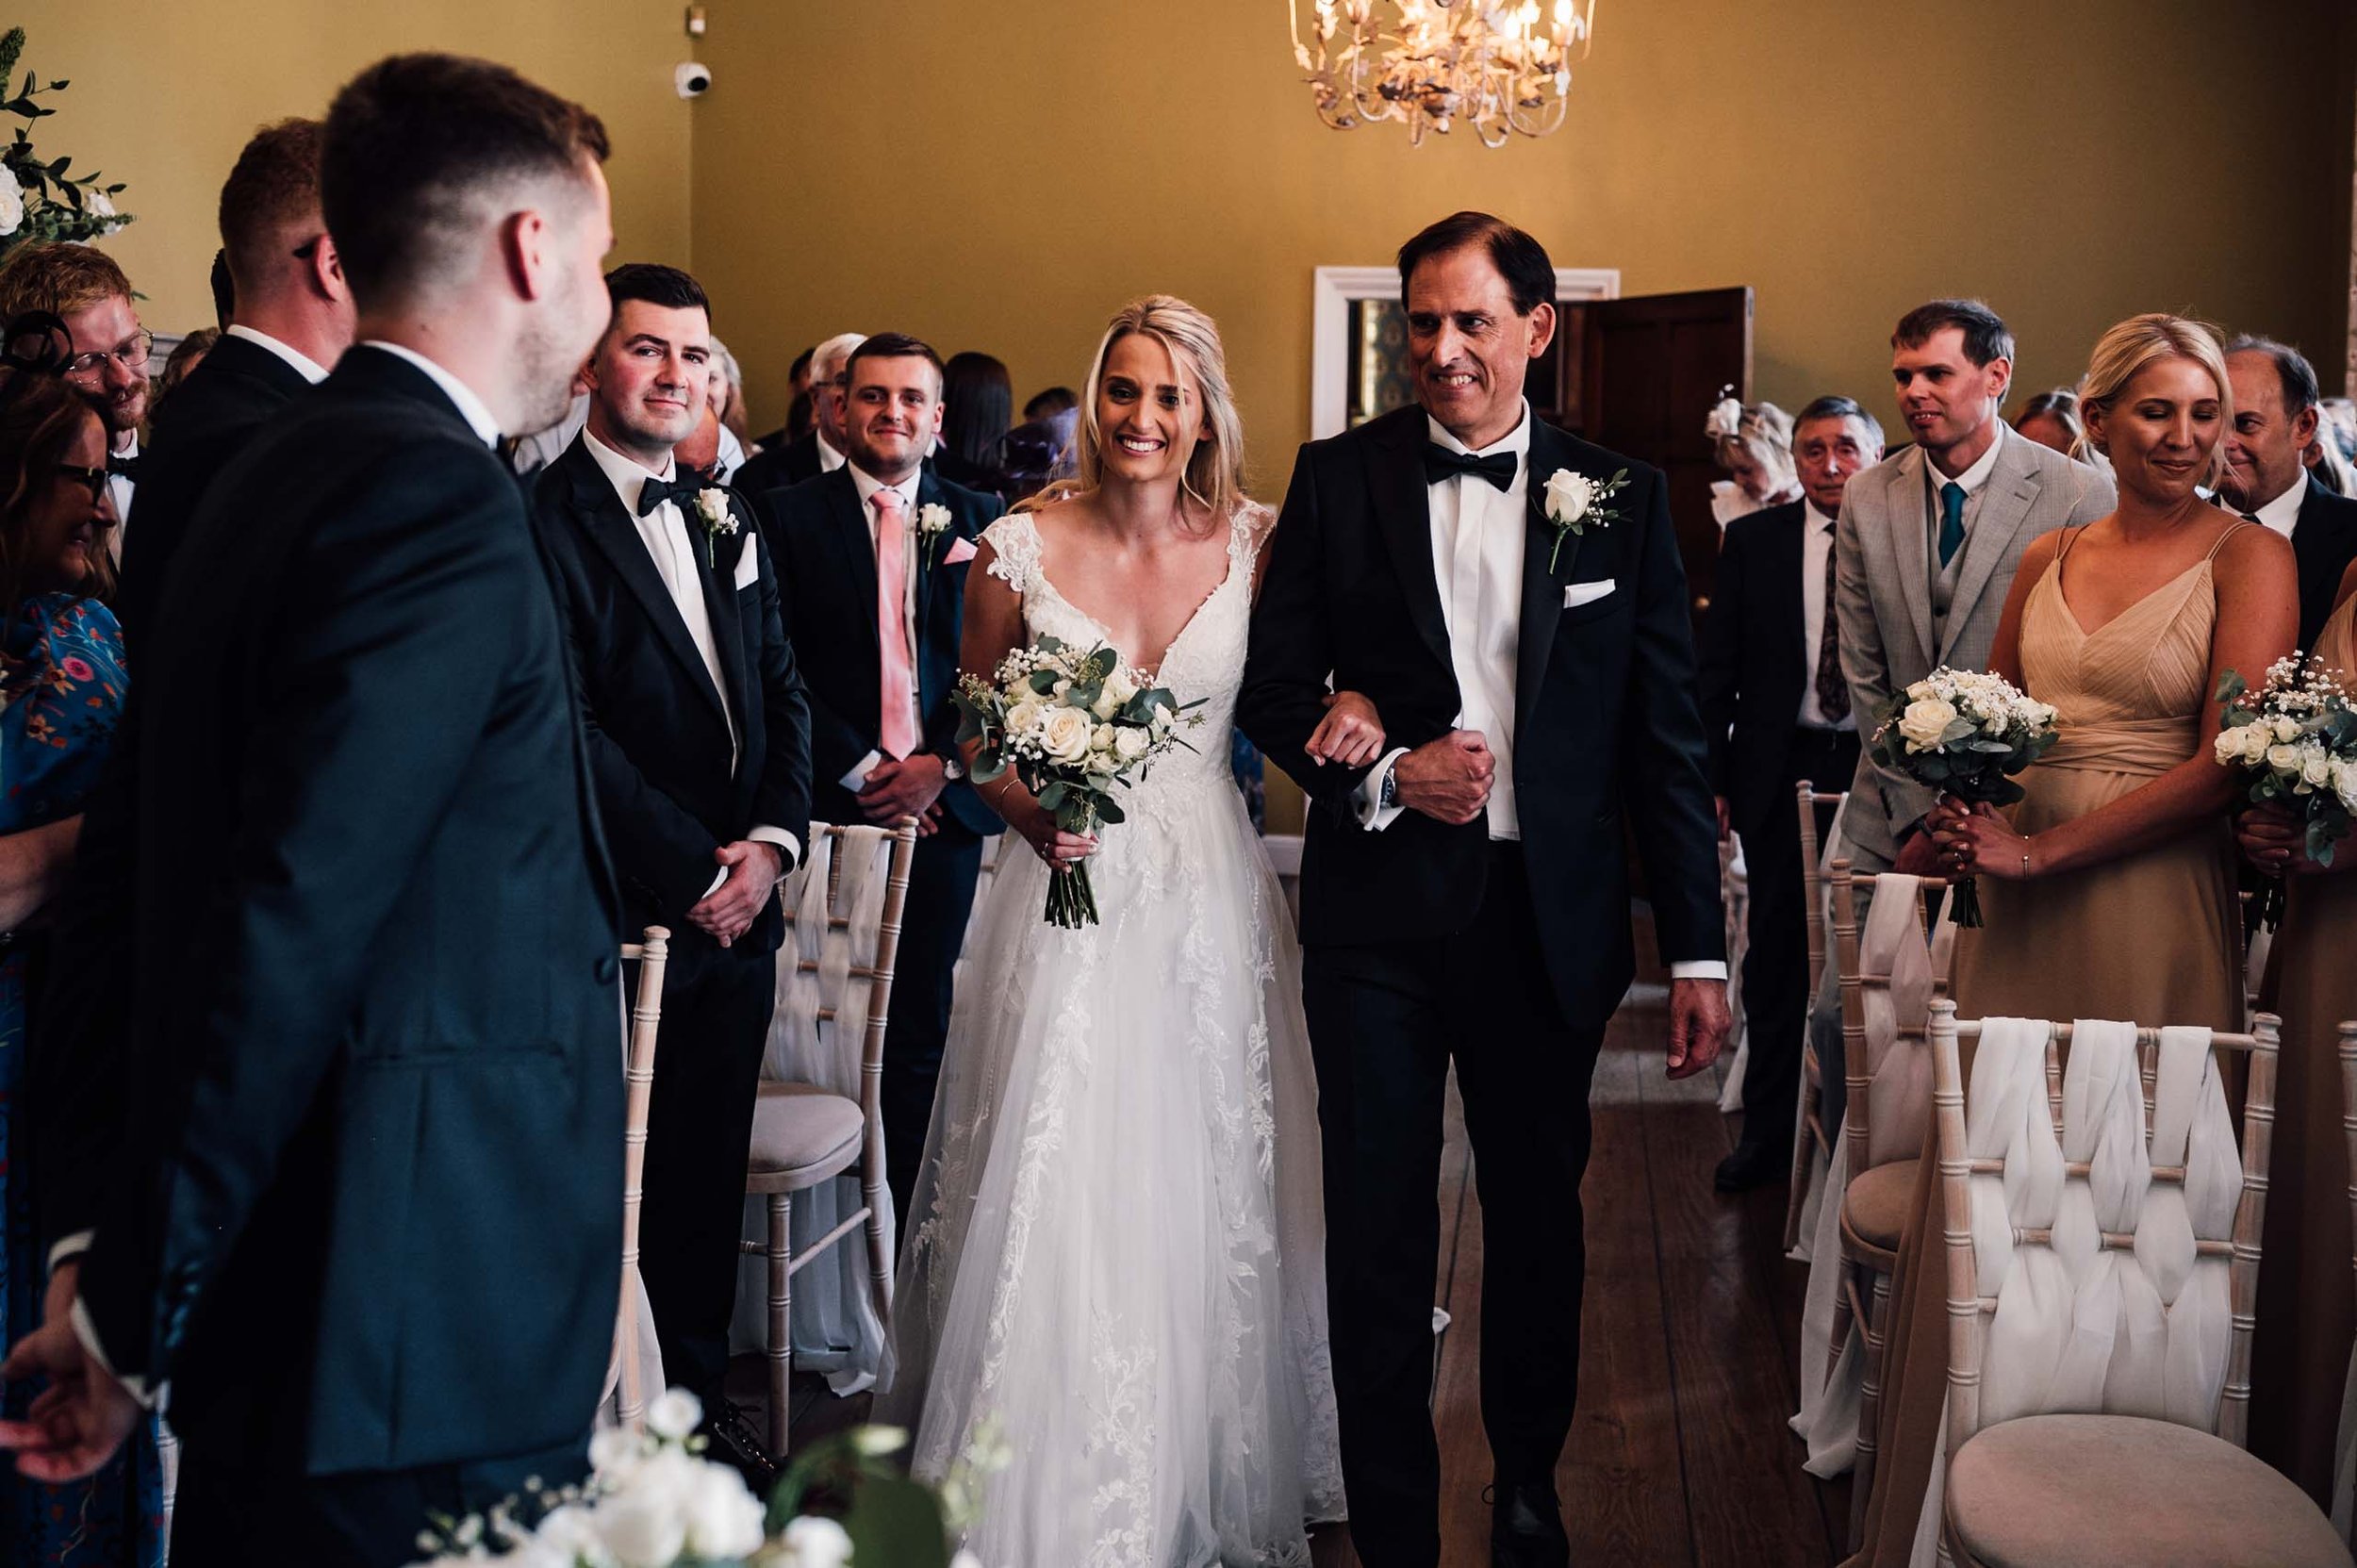 Bride and her father walk down the aisle at Hodsock Priory